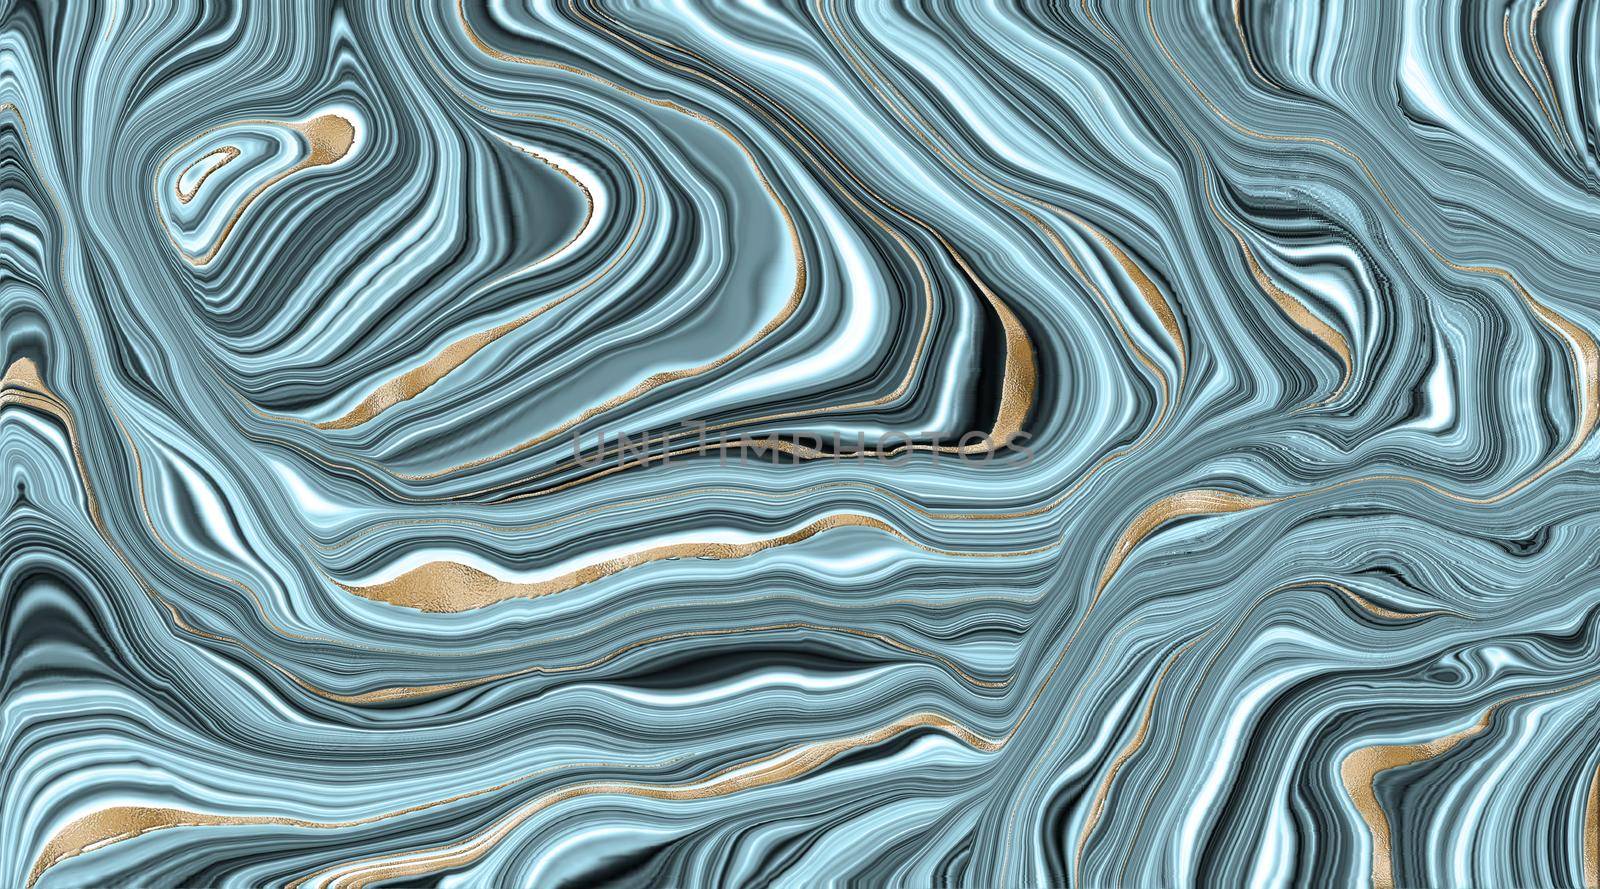 Abstract Agate Background. by NelliPolk